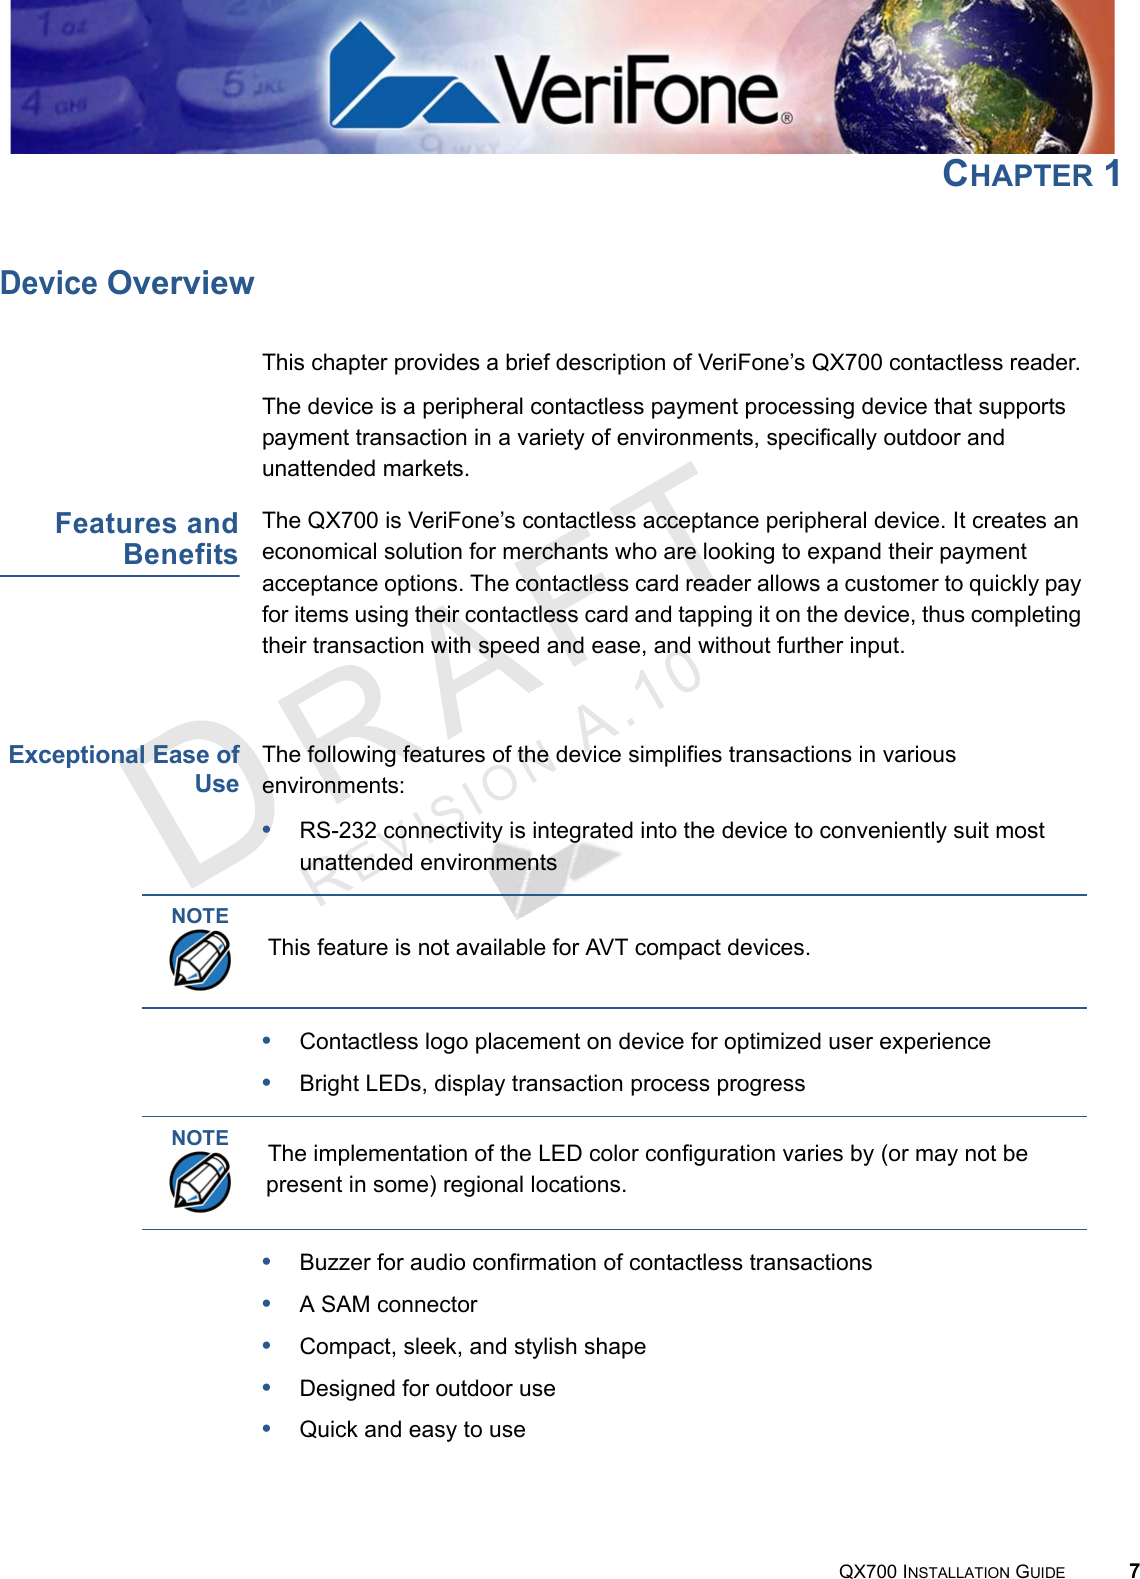 REVISION A.10 QX700 INSTALLATION GUIDE 7CHAPTER 1Device OverviewThis chapter provides a brief description of VeriFone’s QX700 contactless reader. The device is a peripheral contactless payment processing device that supports payment transaction in a variety of environments, specifically outdoor and unattended markets.Features andBenefitsThe QX700 is VeriFone’s contactless acceptance peripheral device. It creates an economical solution for merchants who are looking to expand their payment acceptance options. The contactless card reader allows a customer to quickly pay for items using their contactless card and tapping it on the device, thus completing their transaction with speed and ease, and without further input. Exceptional Ease ofUseThe following features of the device simplifies transactions in various environments:•RS-232 connectivity is integrated into the device to conveniently suit most unattended environments•Contactless logo placement on device for optimized user experience•Bright LEDs, display transaction process progress•Buzzer for audio confirmation of contactless transactions•A SAM connector•Compact, sleek, and stylish shape•Designed for outdoor use•Quick and easy to useNOTEThis feature is not available for AVT compact devices.NOTEThe implementation of the LED color configuration varies by (or may not be present in some) regional locations.